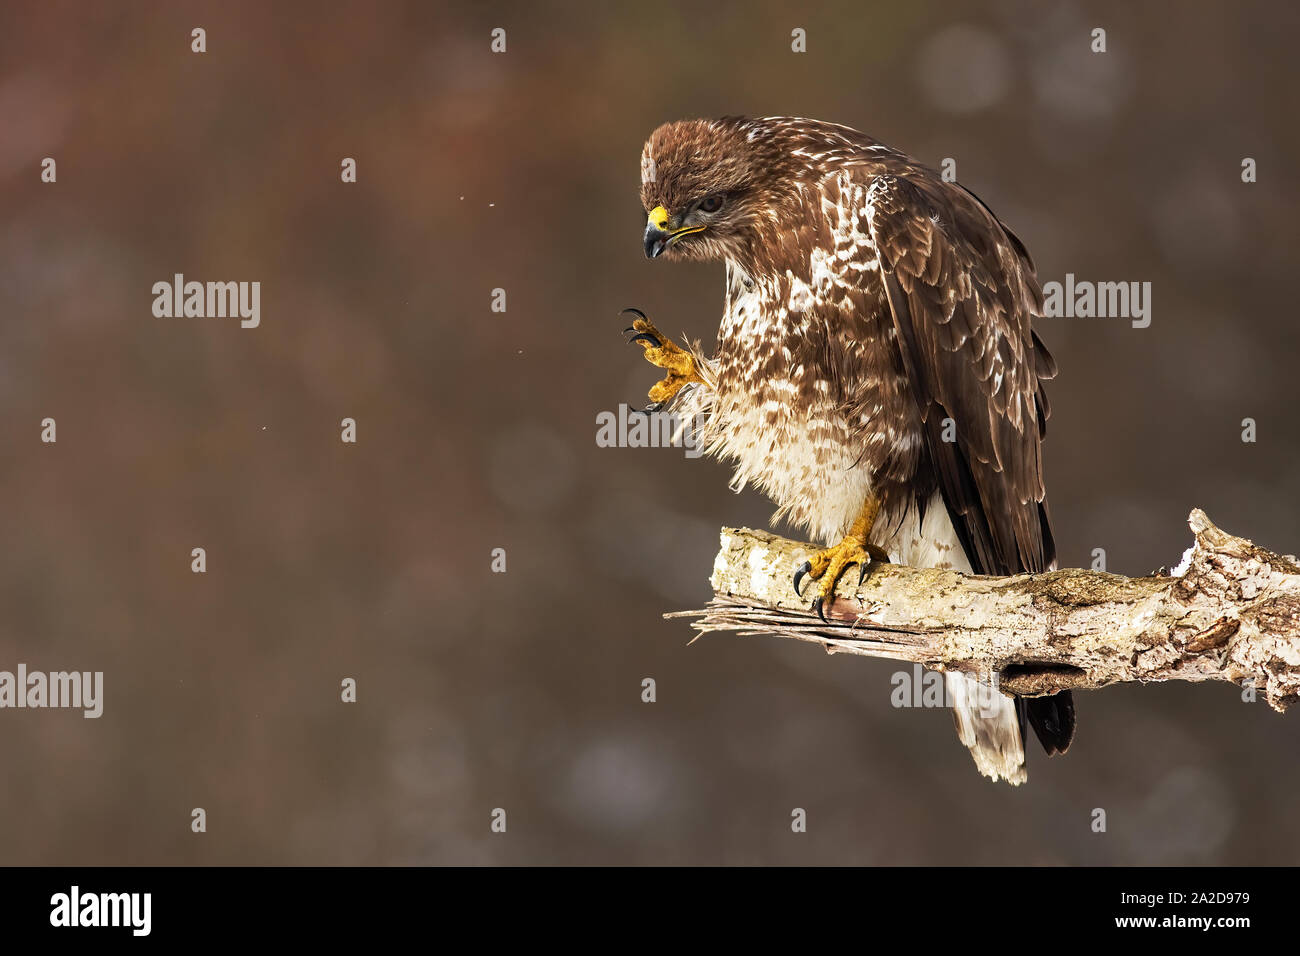 Wild common buzzard, buteo buteo, scratching and cleaning feathers while sitting on a bough in winter nature. Animal hygiene in nature. Stock Photo